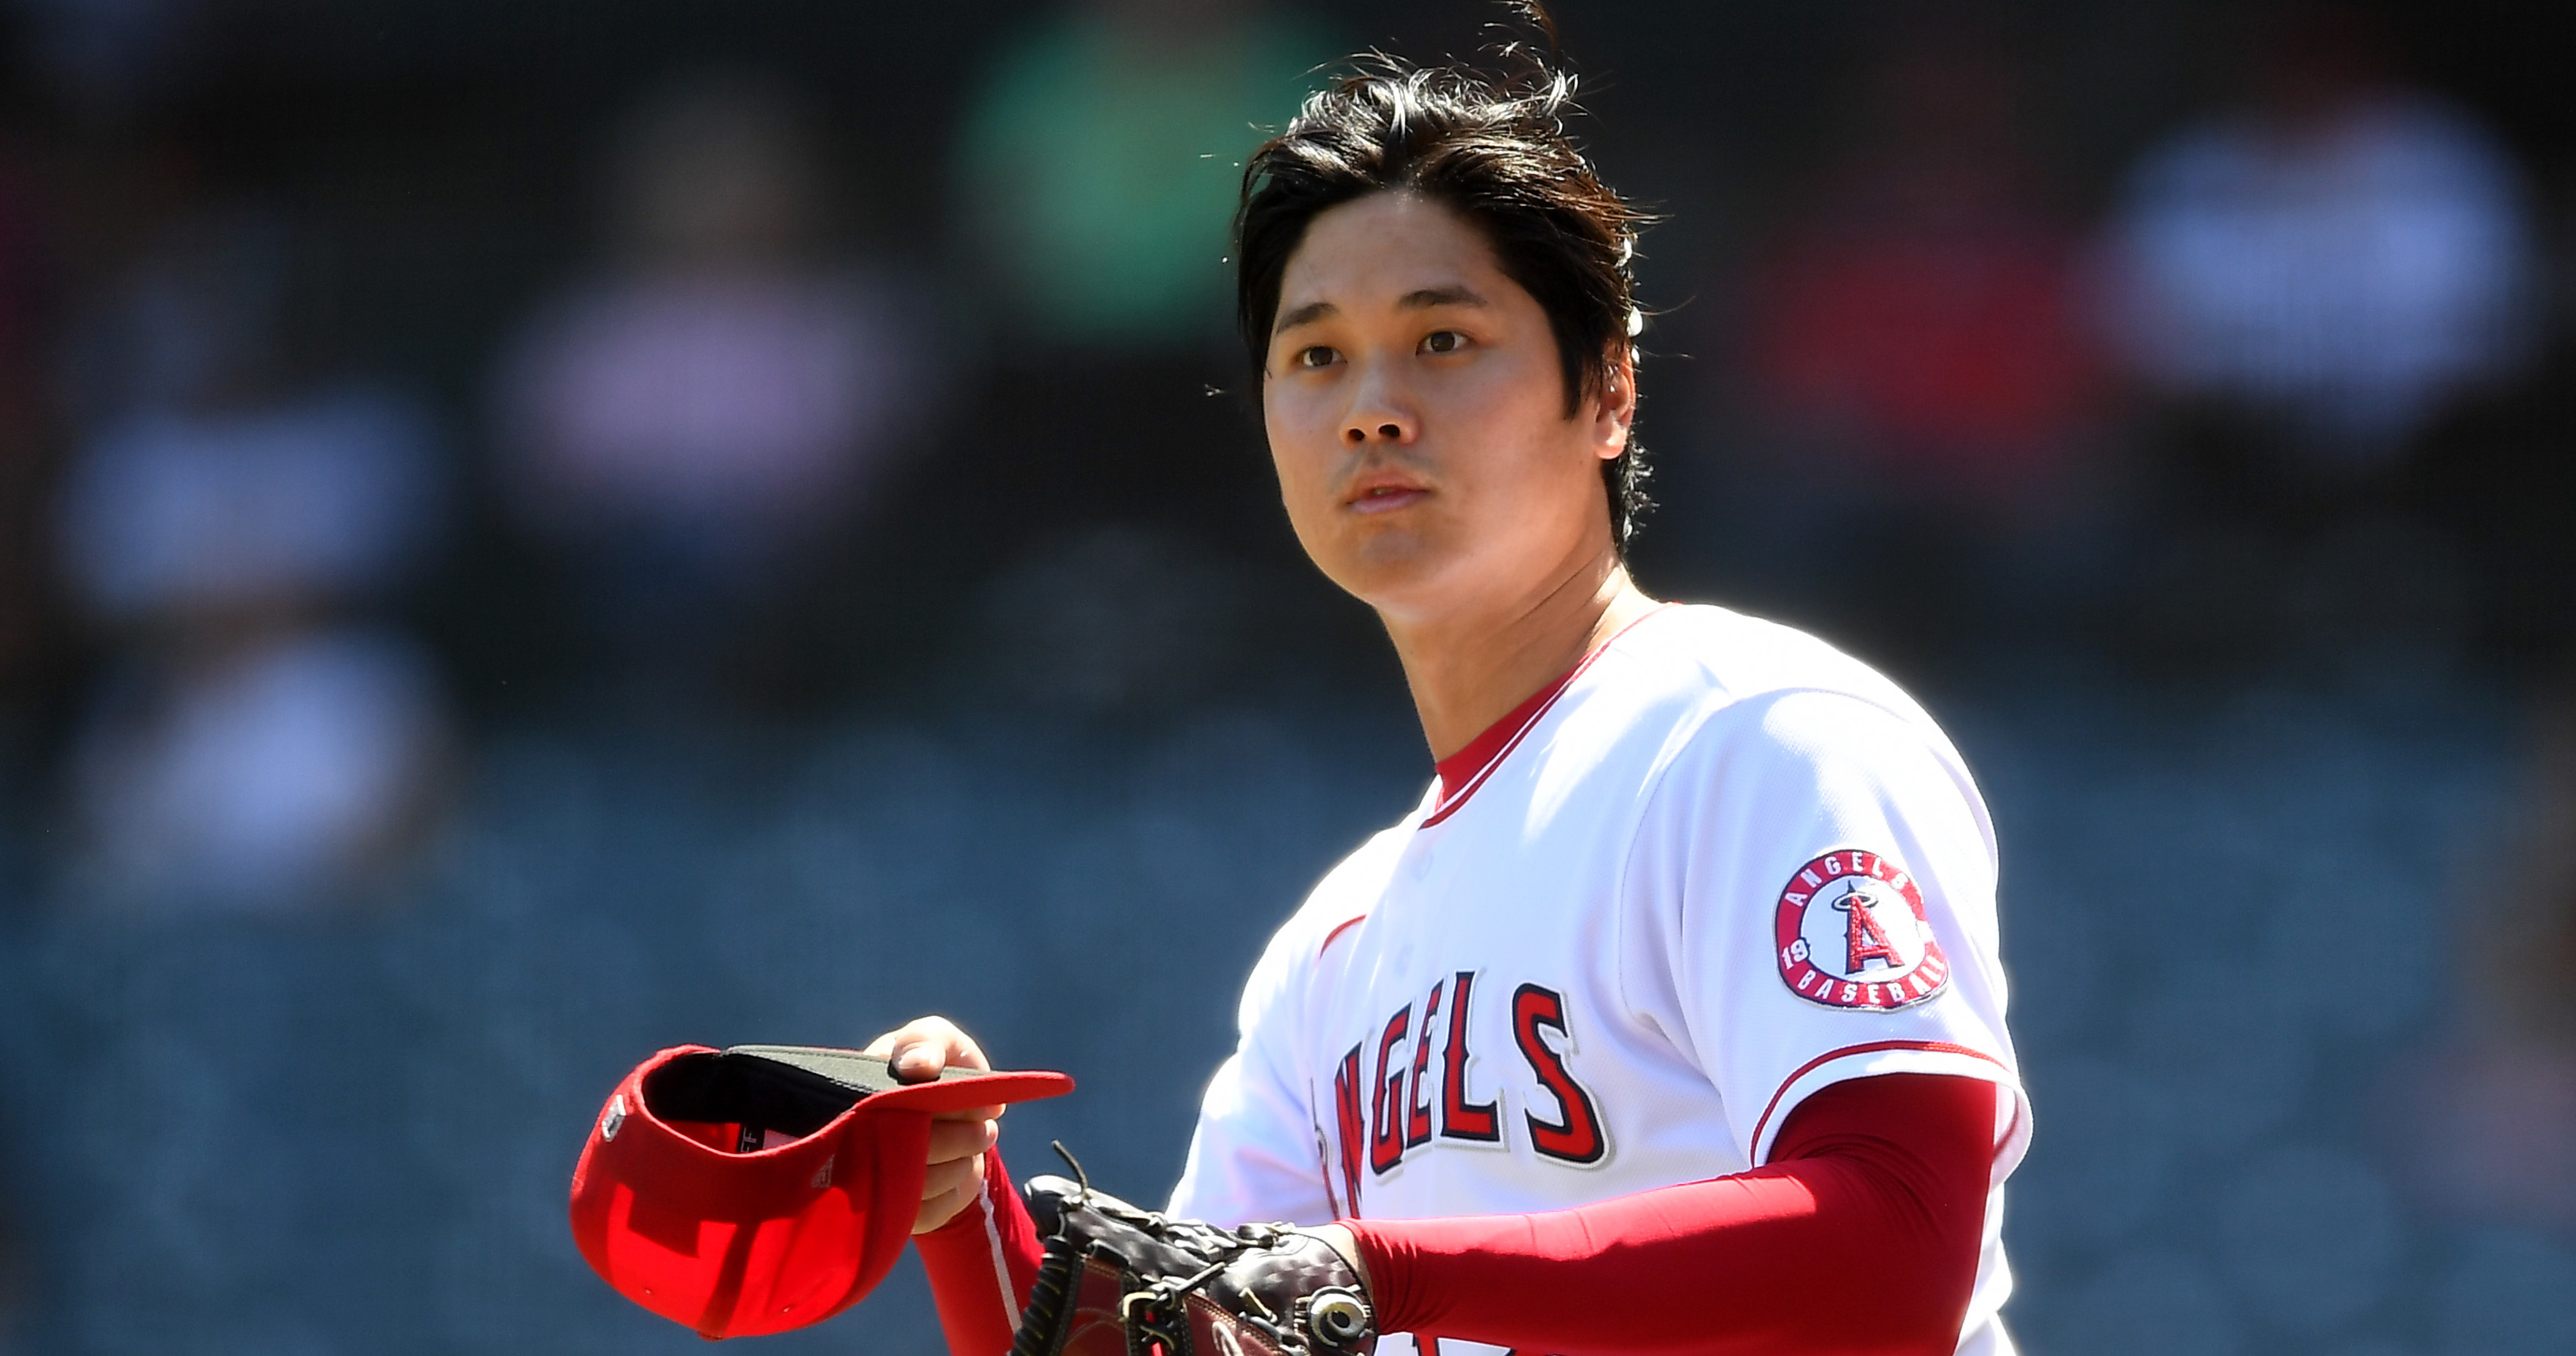 Angels' Shohei Ohtani Exits Game Early vs. Padres